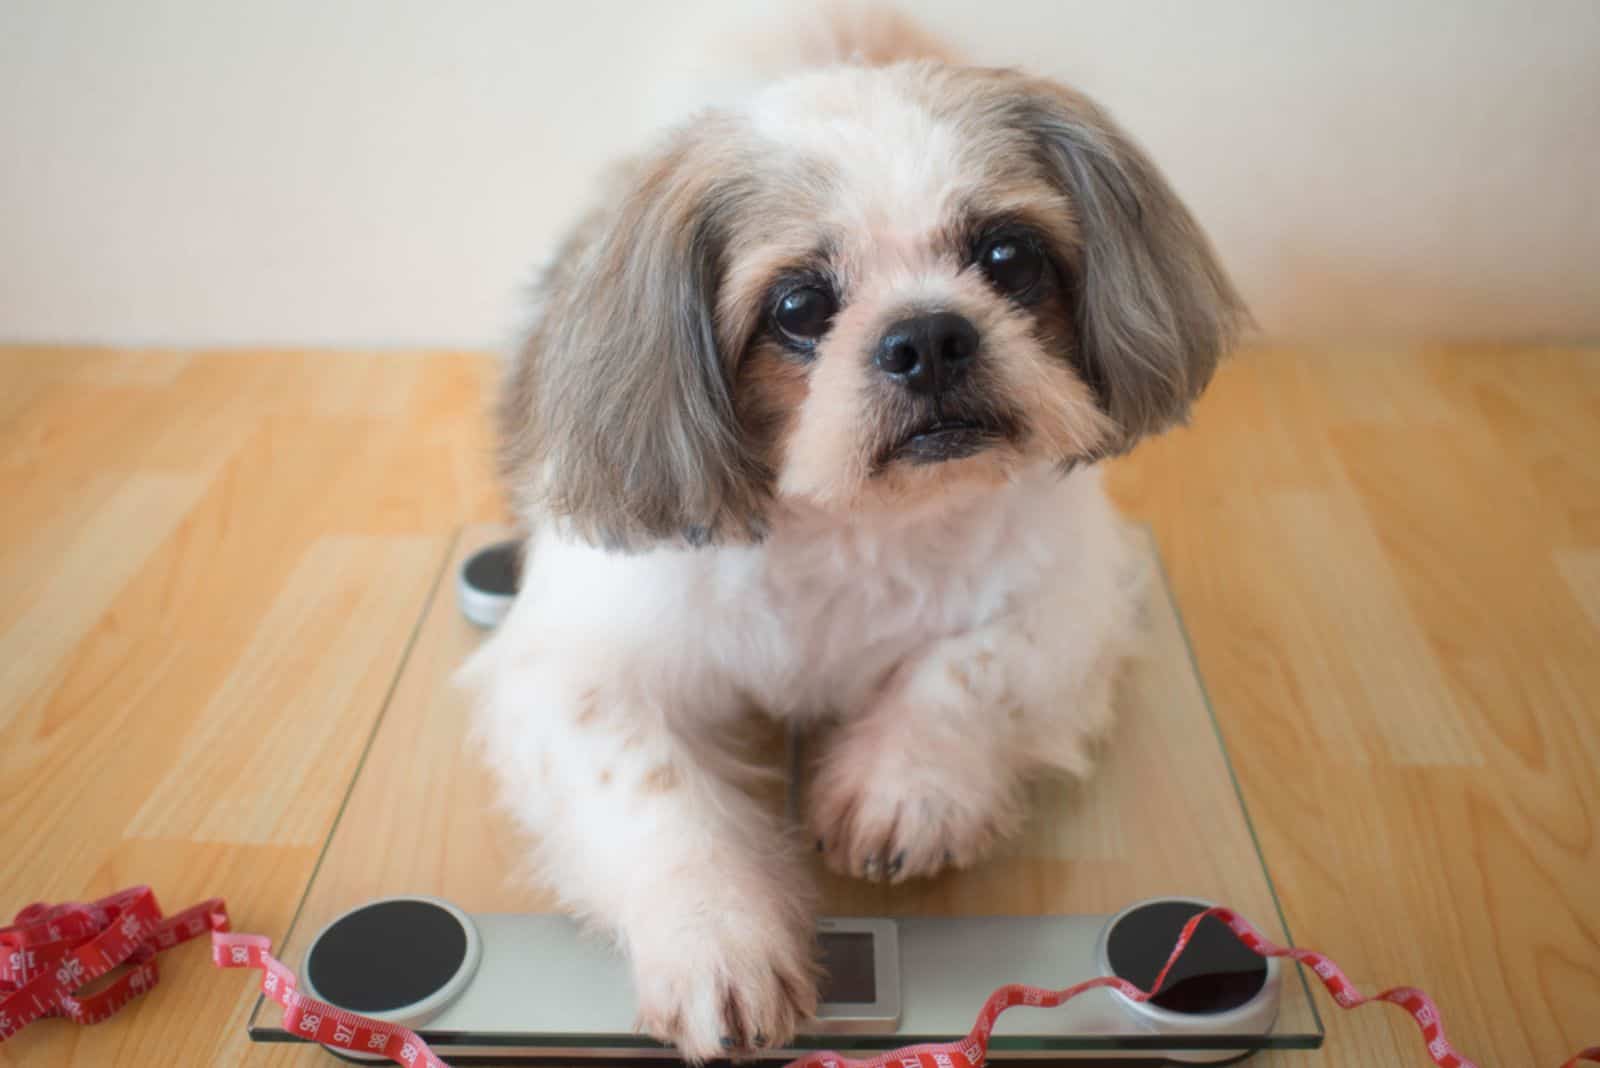 Fat Shih tzu dog sitting on weight scales with red measuring tape